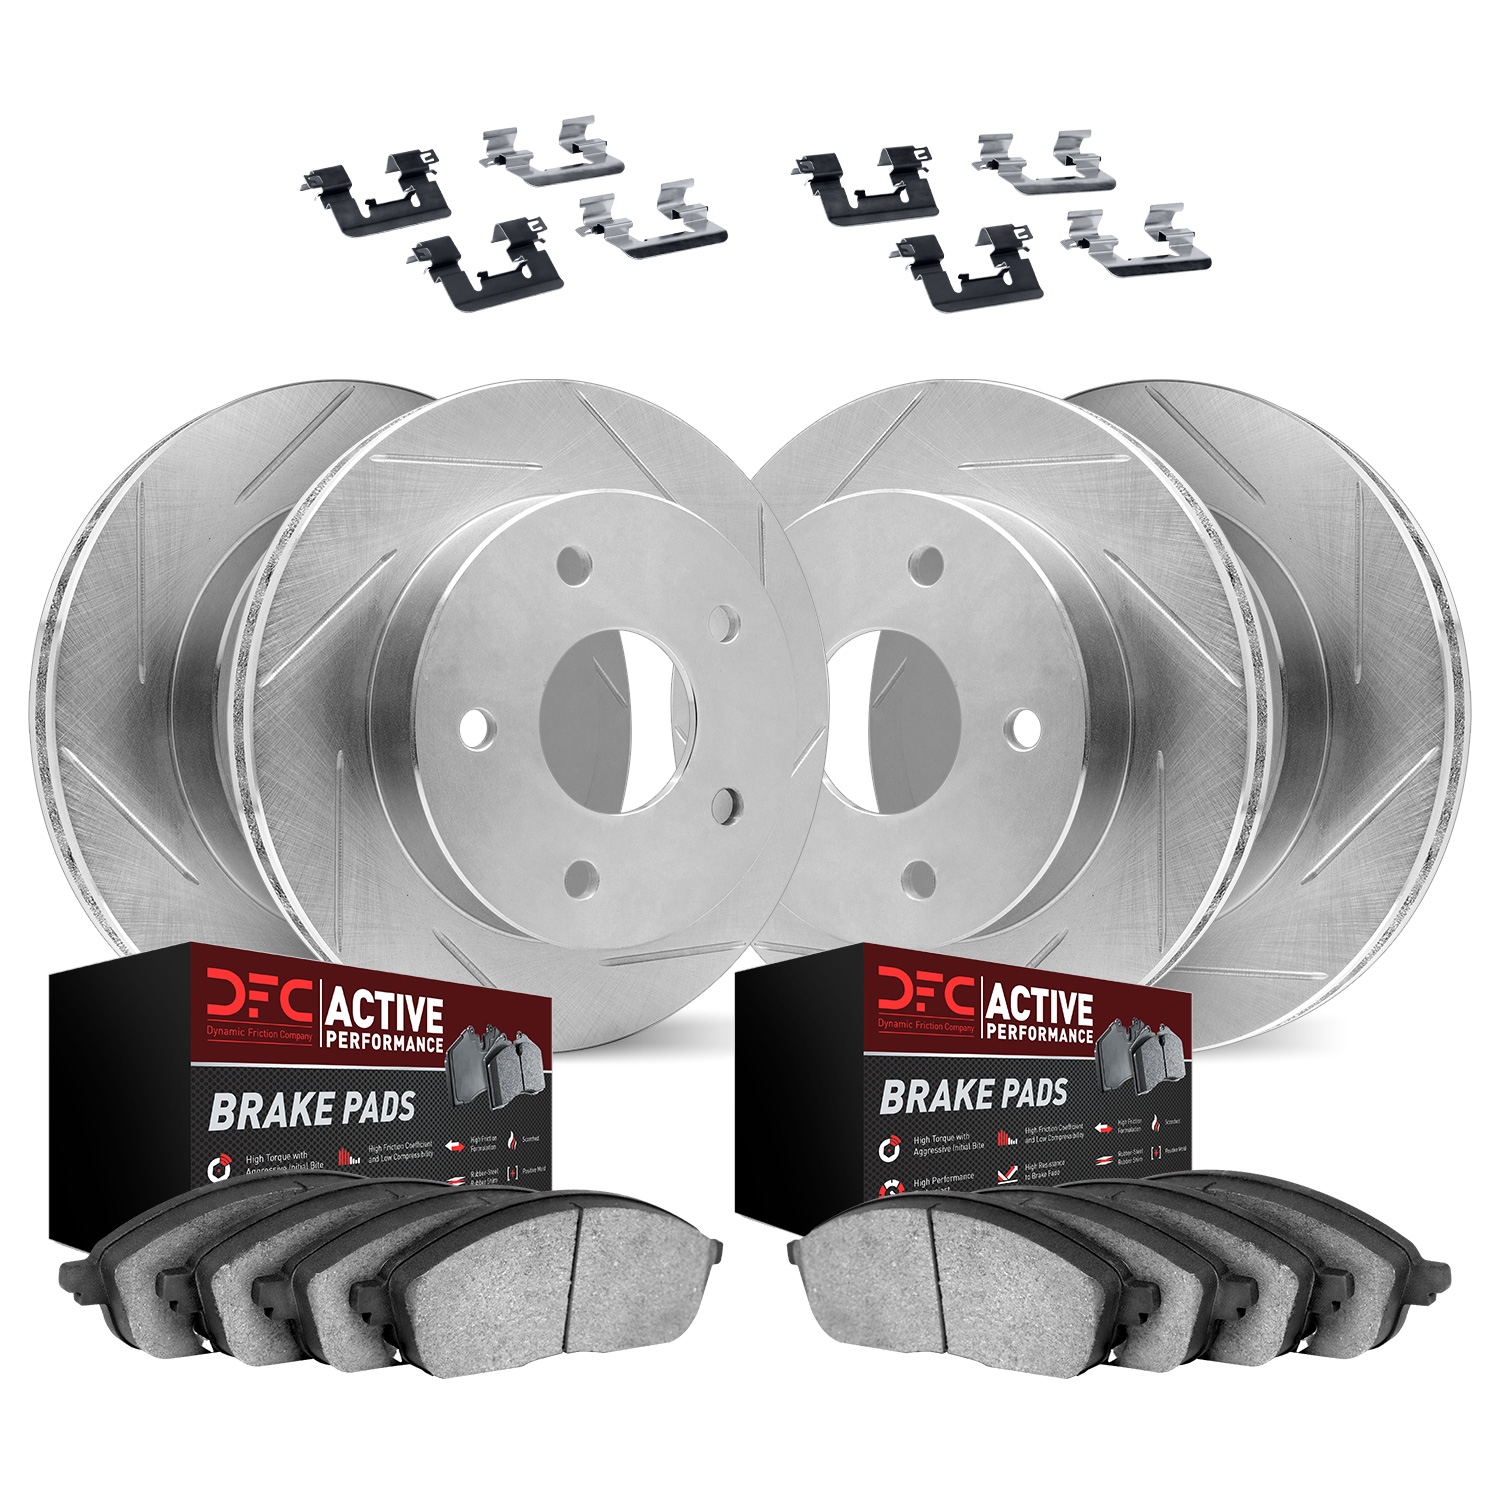 2714-46001 Geoperformance Slotted Brake Rotors with Active Performance Pads Kits & Hardware, 2004-2009 GM, Position: Front and R